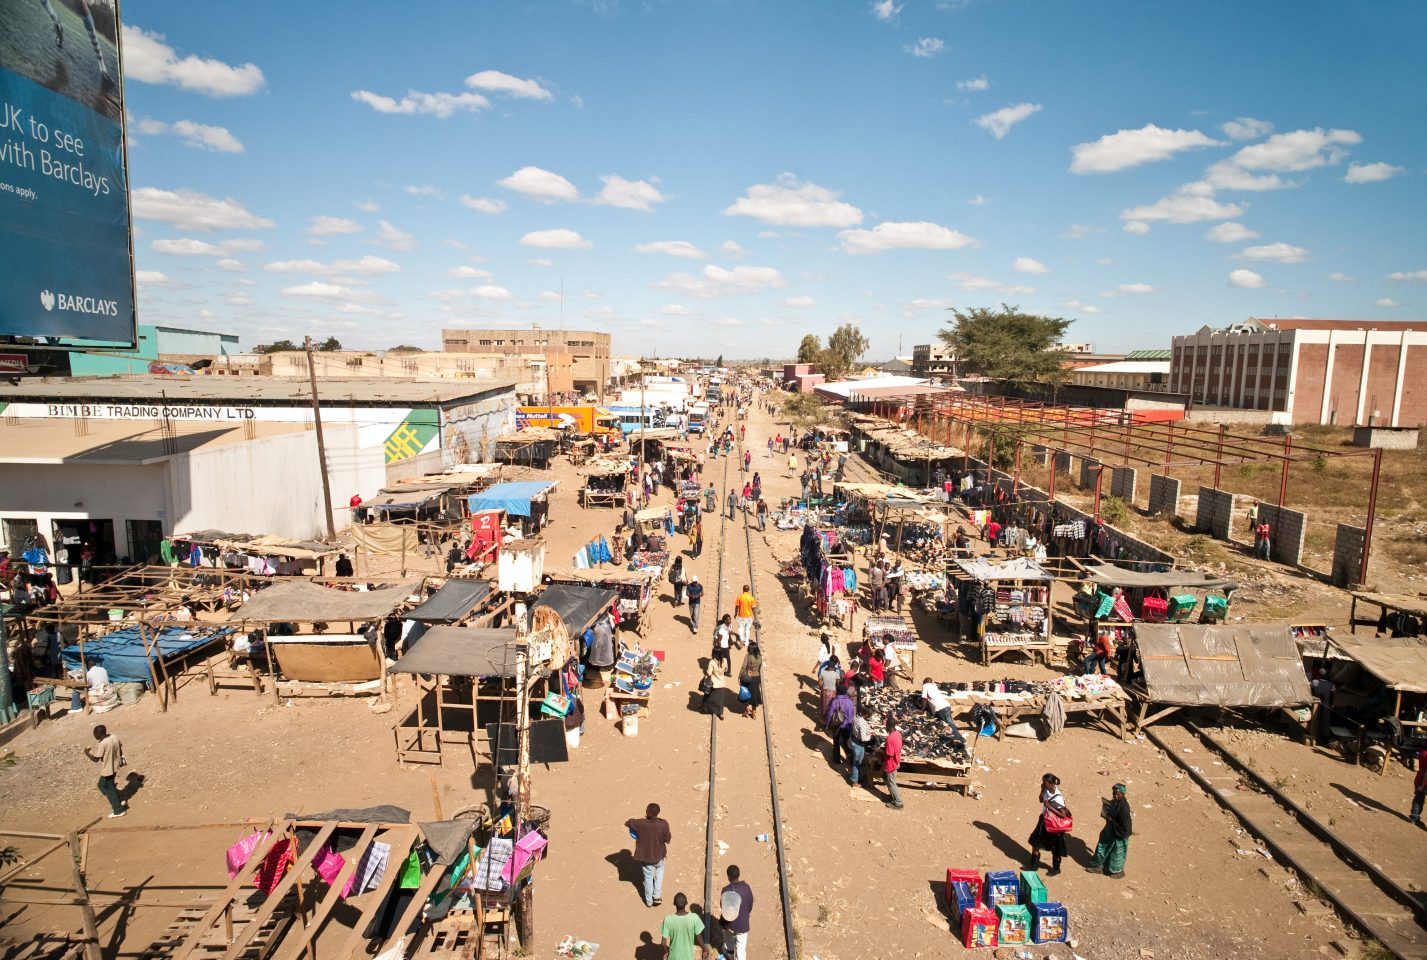 Don't skip the vibrant city of Lusaka with its markets, galleries and nightlife.